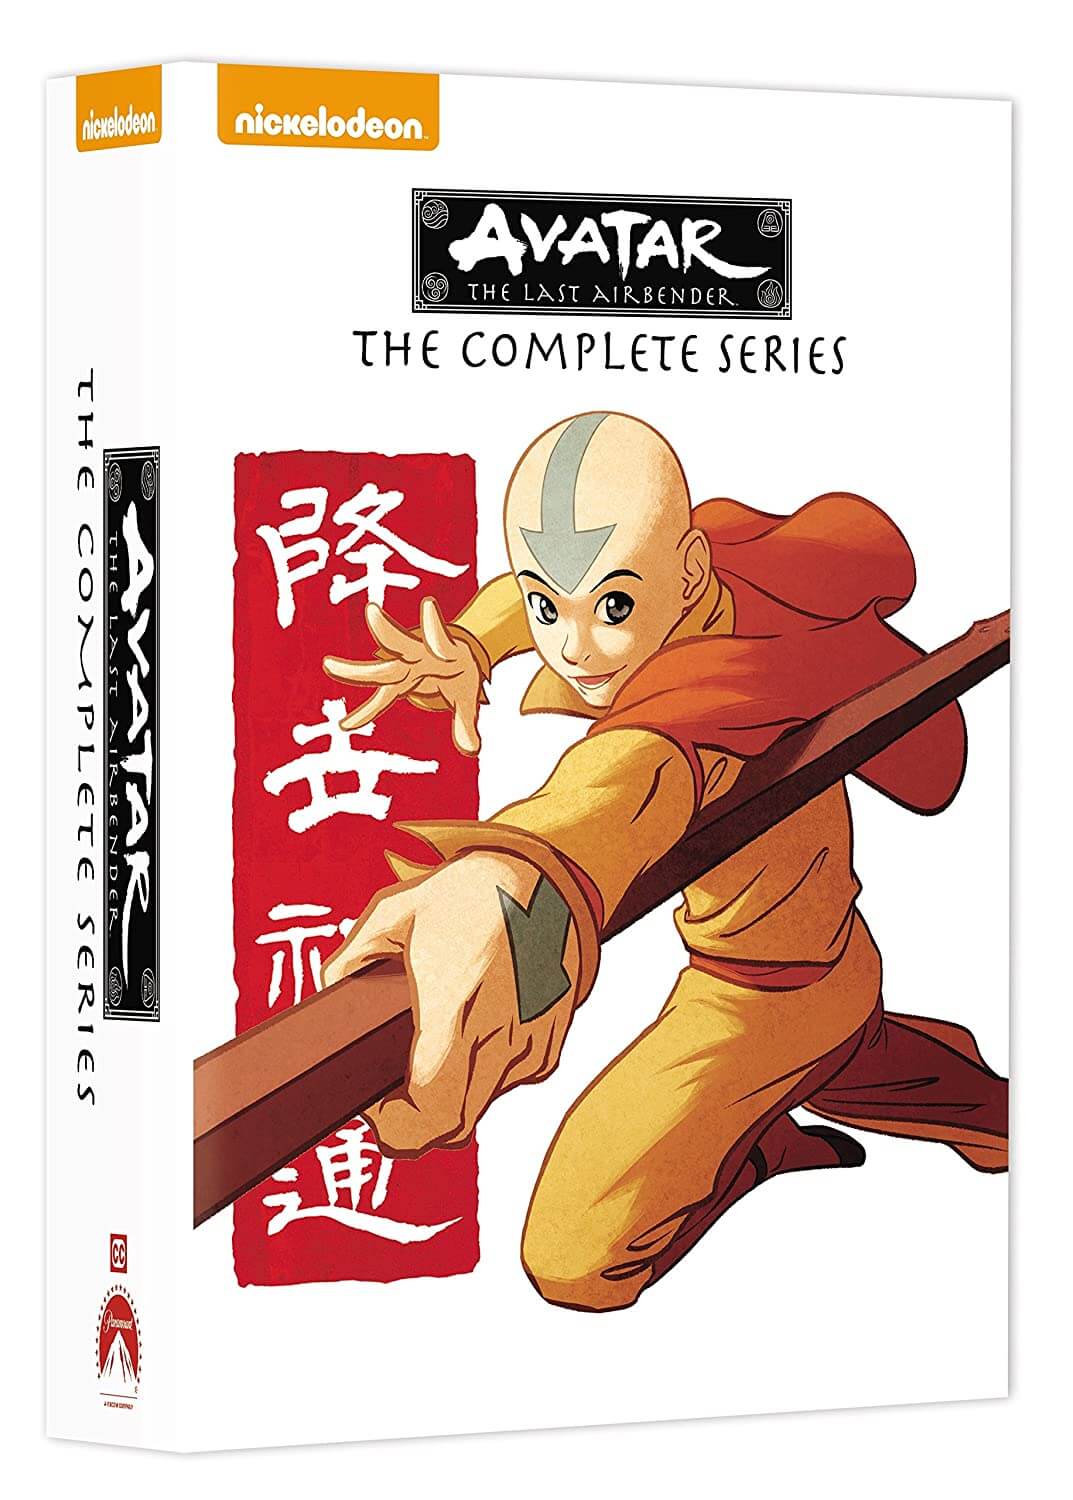 "Avatar The Last Airbender" Complete Series